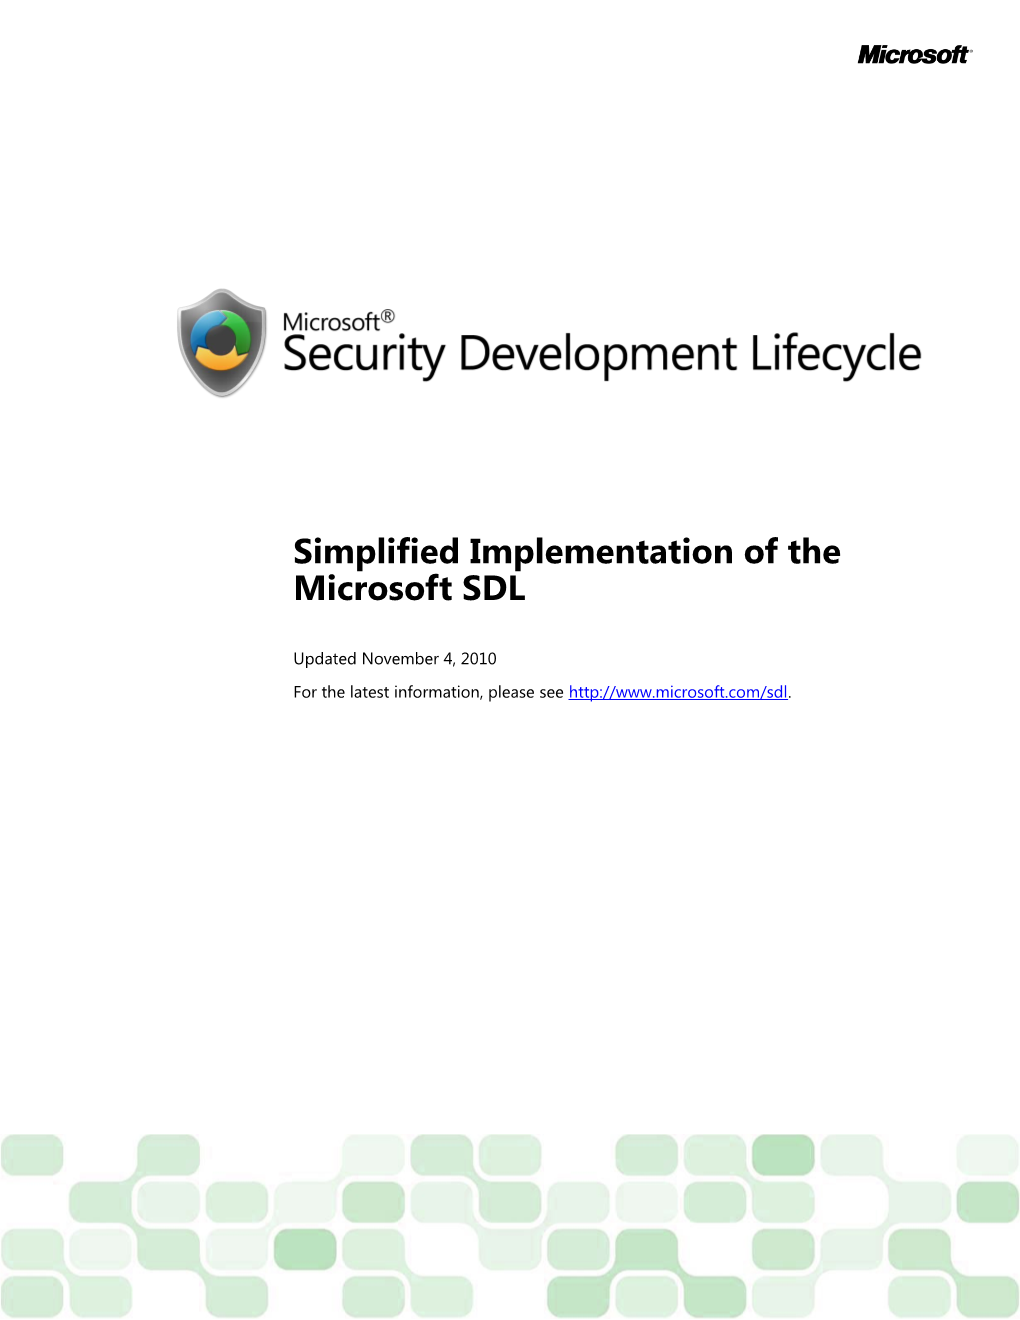 Simplified Implementation of the Microsoft SDL